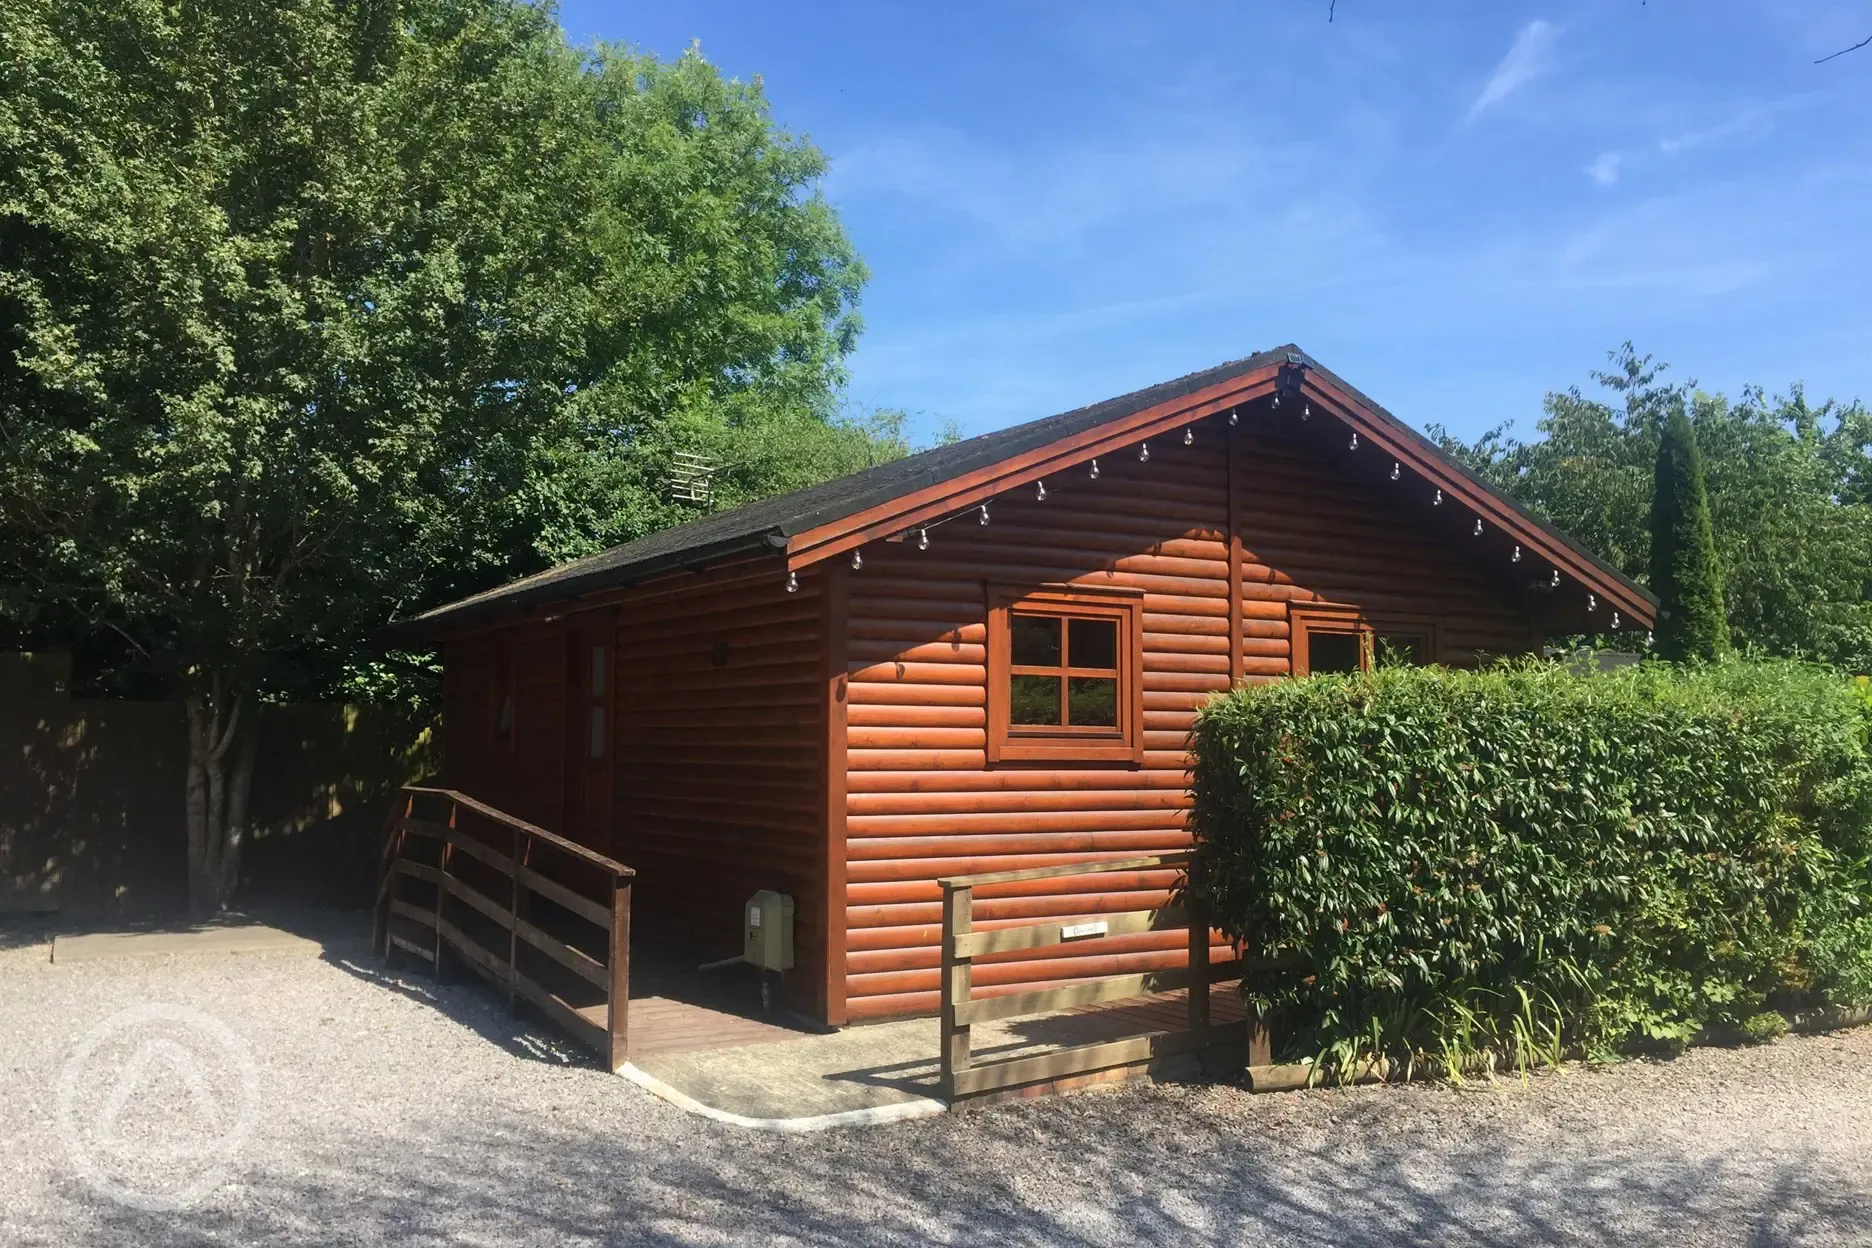 Lodge for hire sleeping up to 4 adults